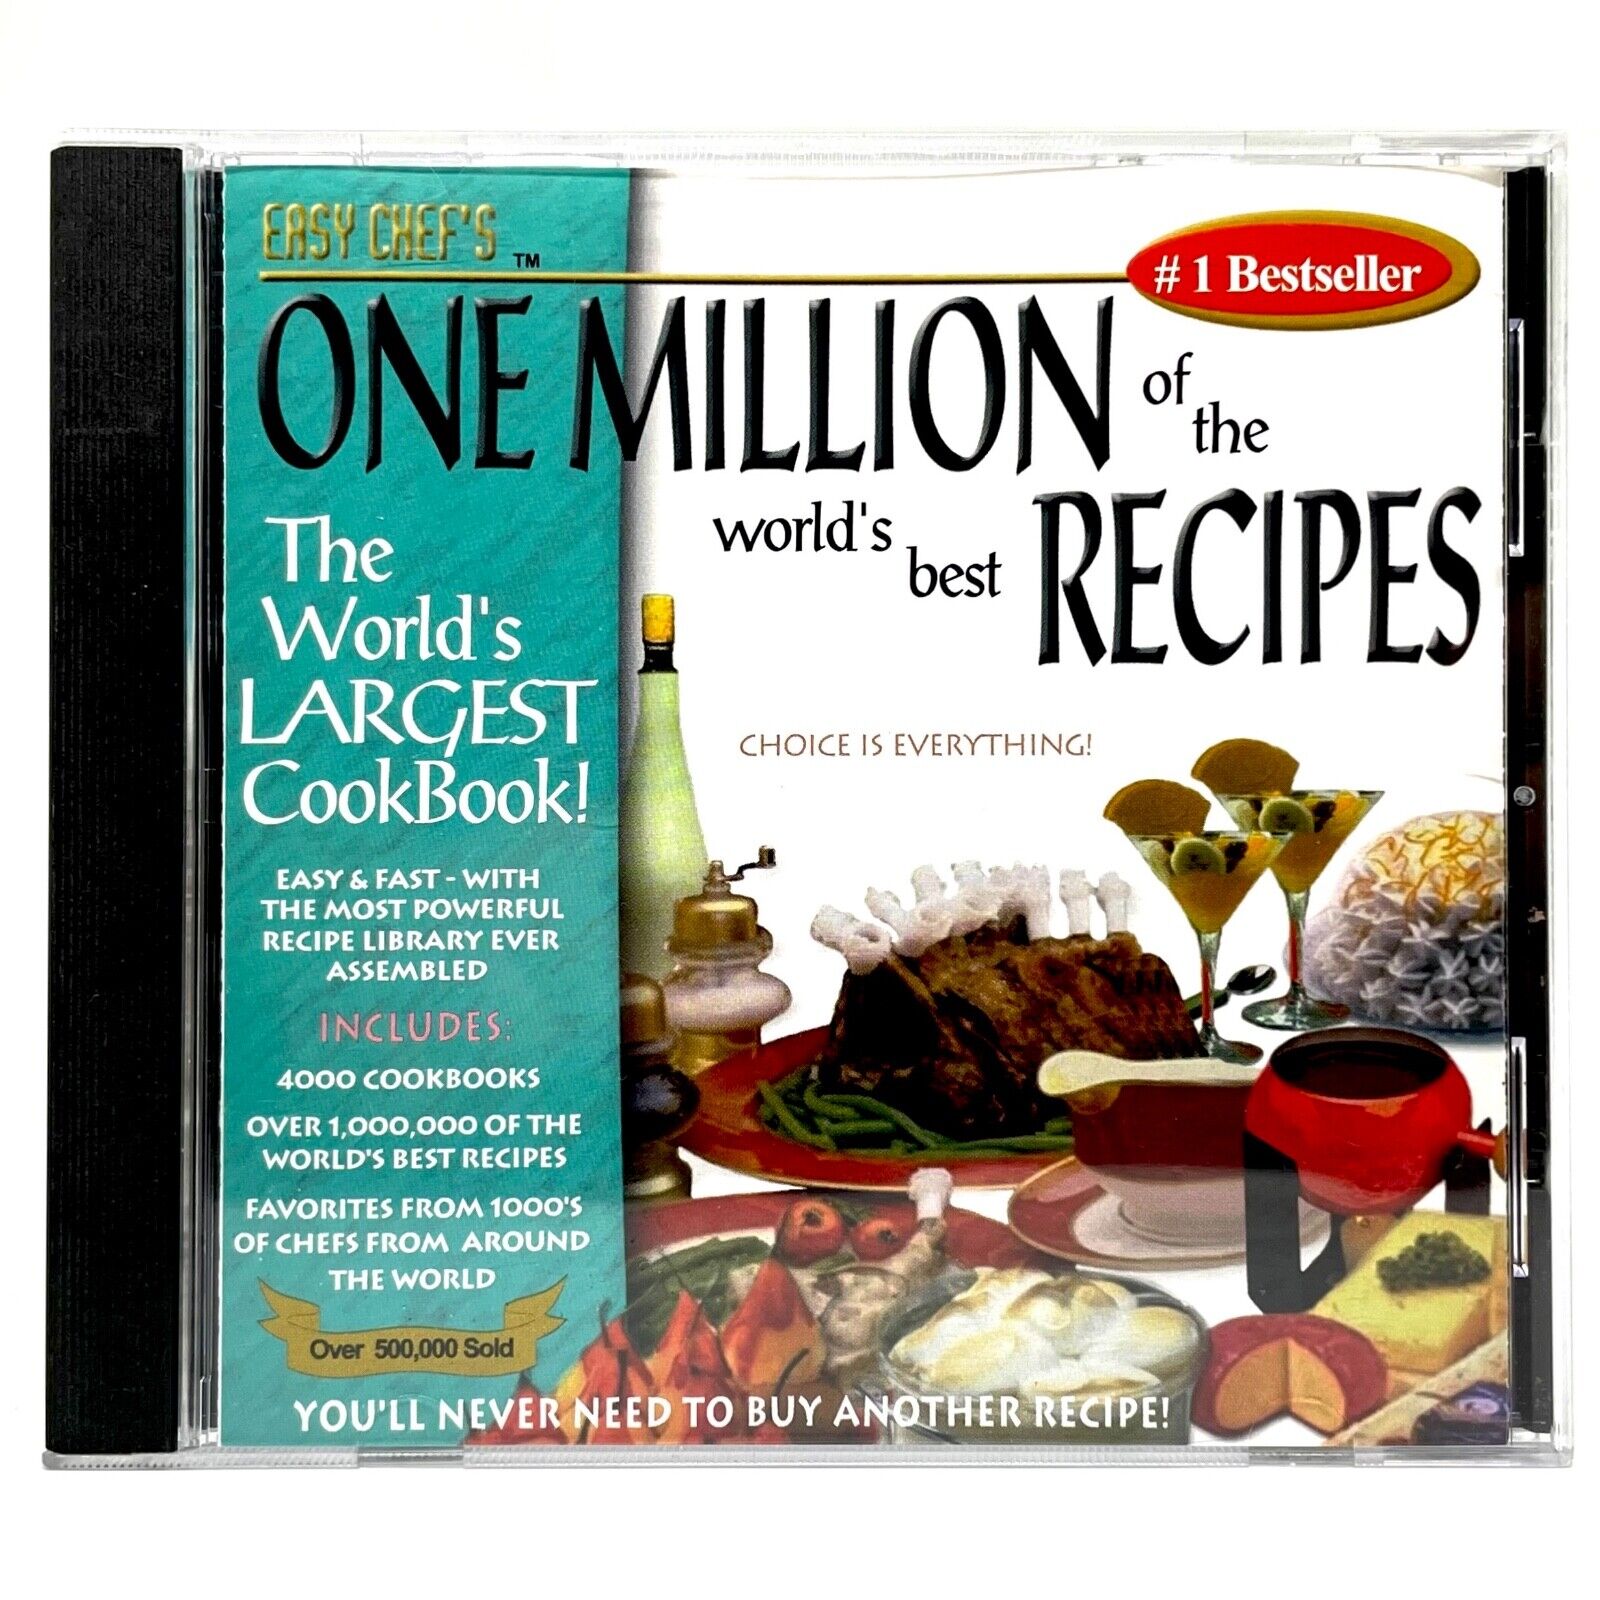 Easy Chef\'s One Million of the World\'s Best Recipes CD-ROM PC for Windows 3.1